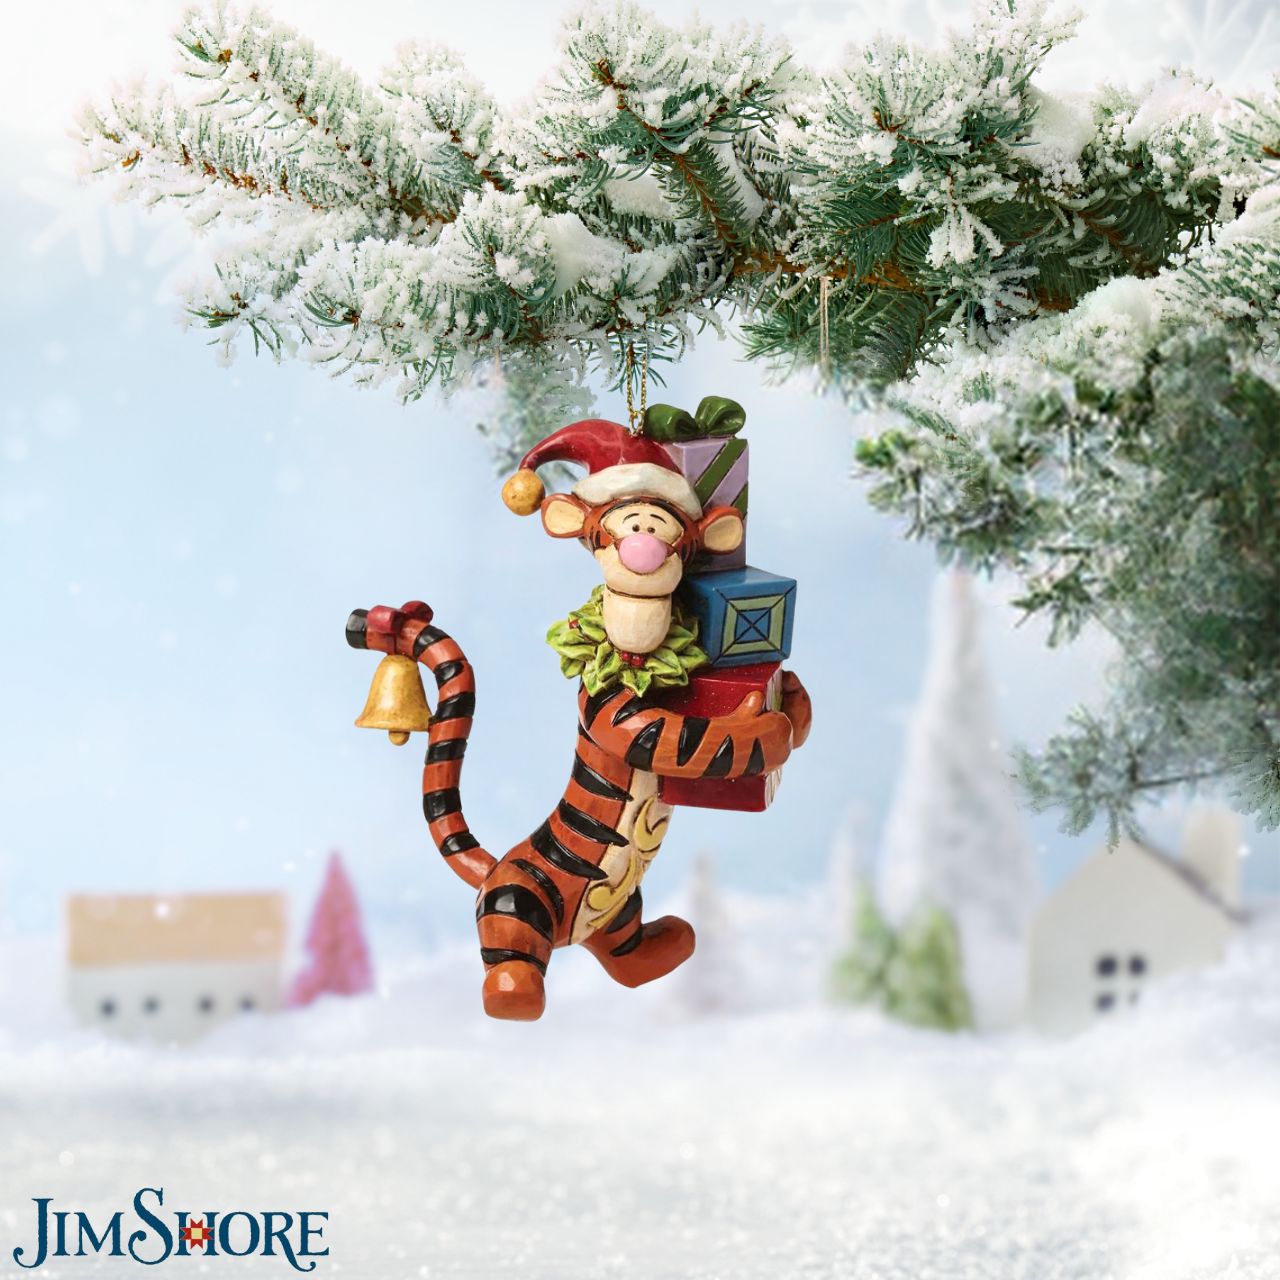 Disney Traditions Tigger Hanging Ornament  This hanging ornament shows that Tigger will do anything for ole St. Nick! Designed by award winning artist and sculptor, Jim Shore for the Disney Traditions brand. The hanging ornament is made from cast stone.